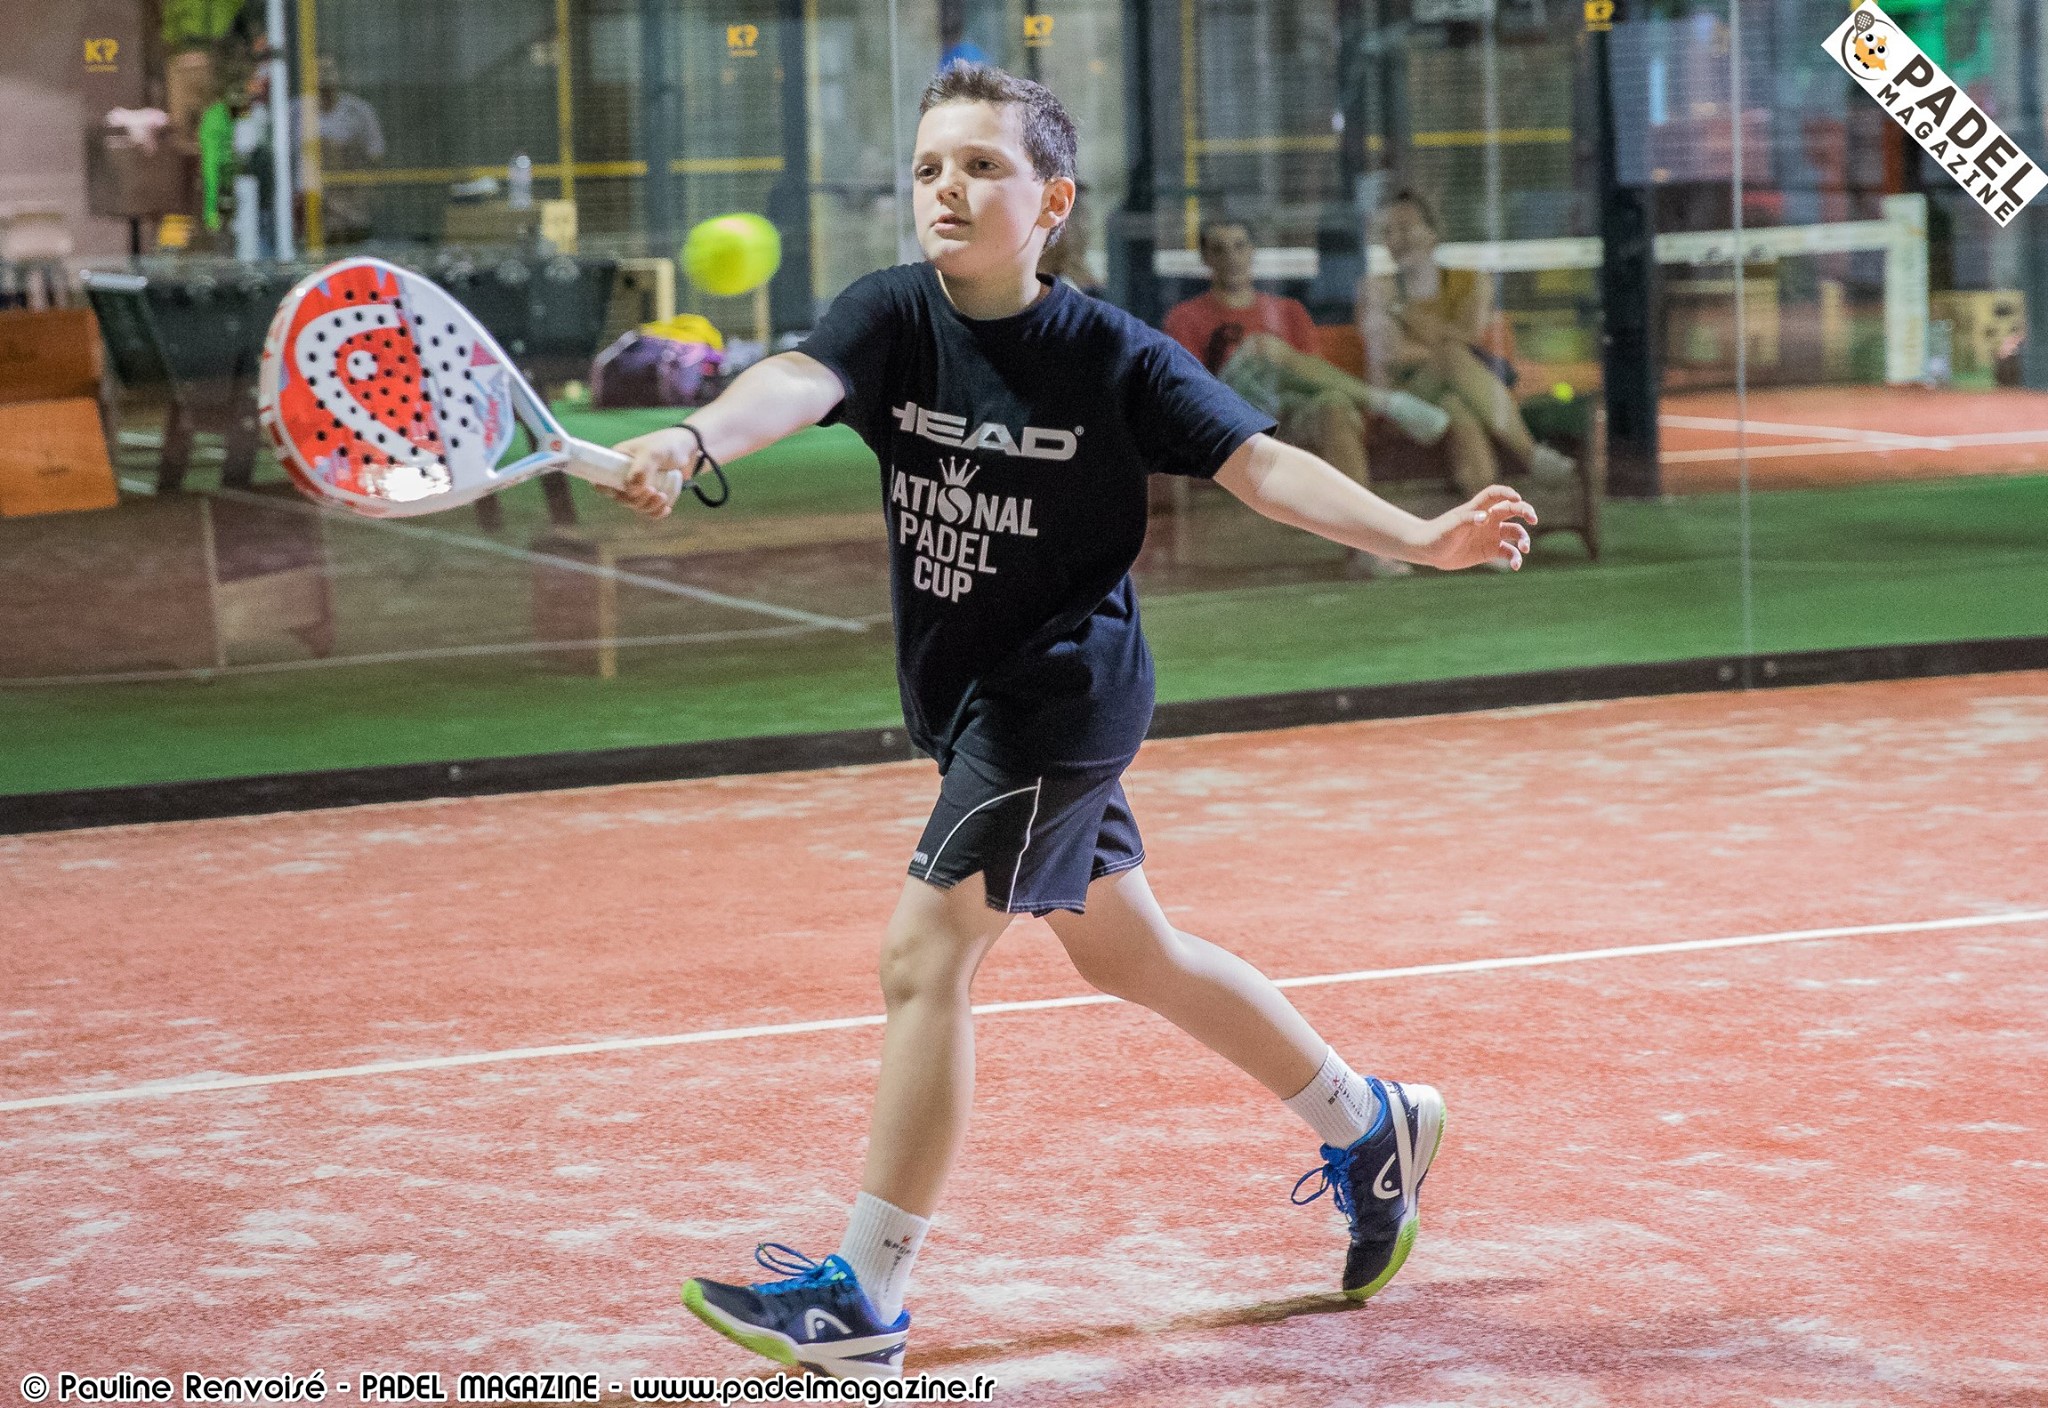 Discover the padel during the holidays